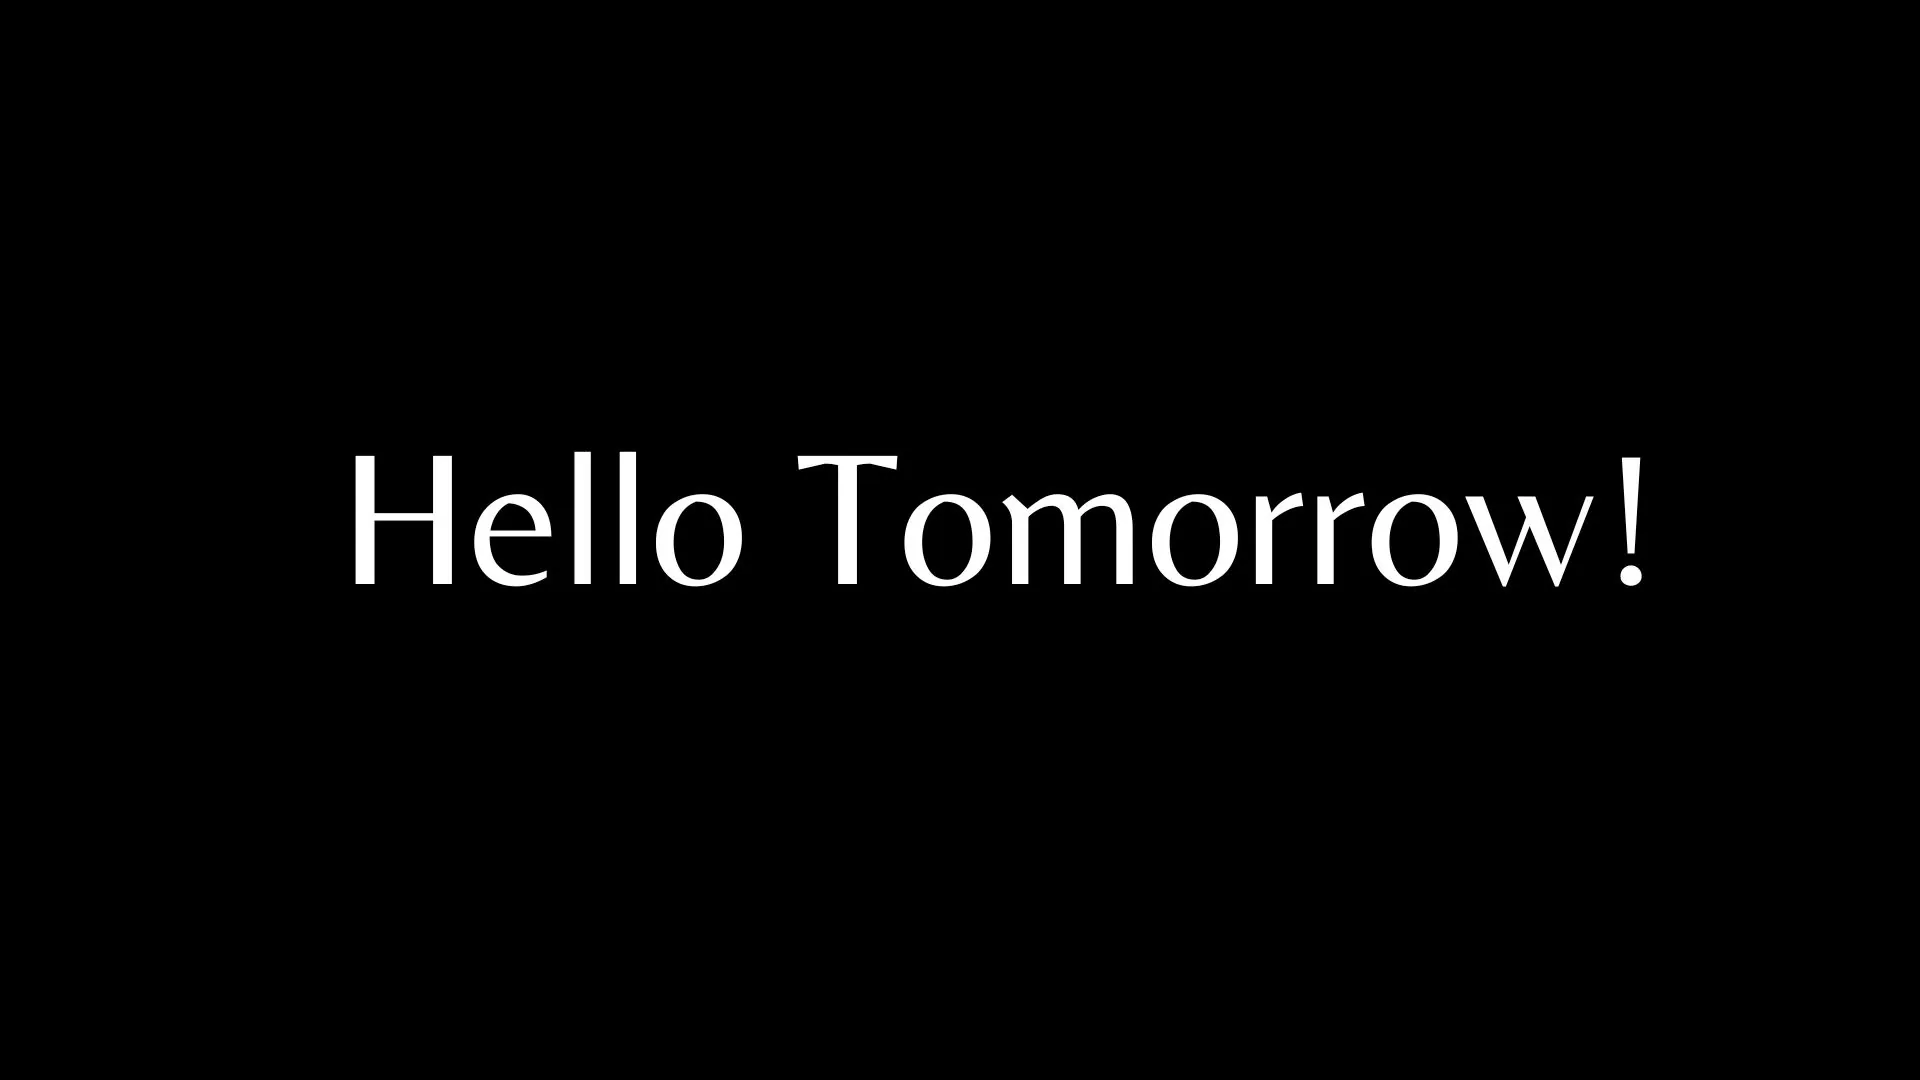 Hello Tomorrow! Parents Guide